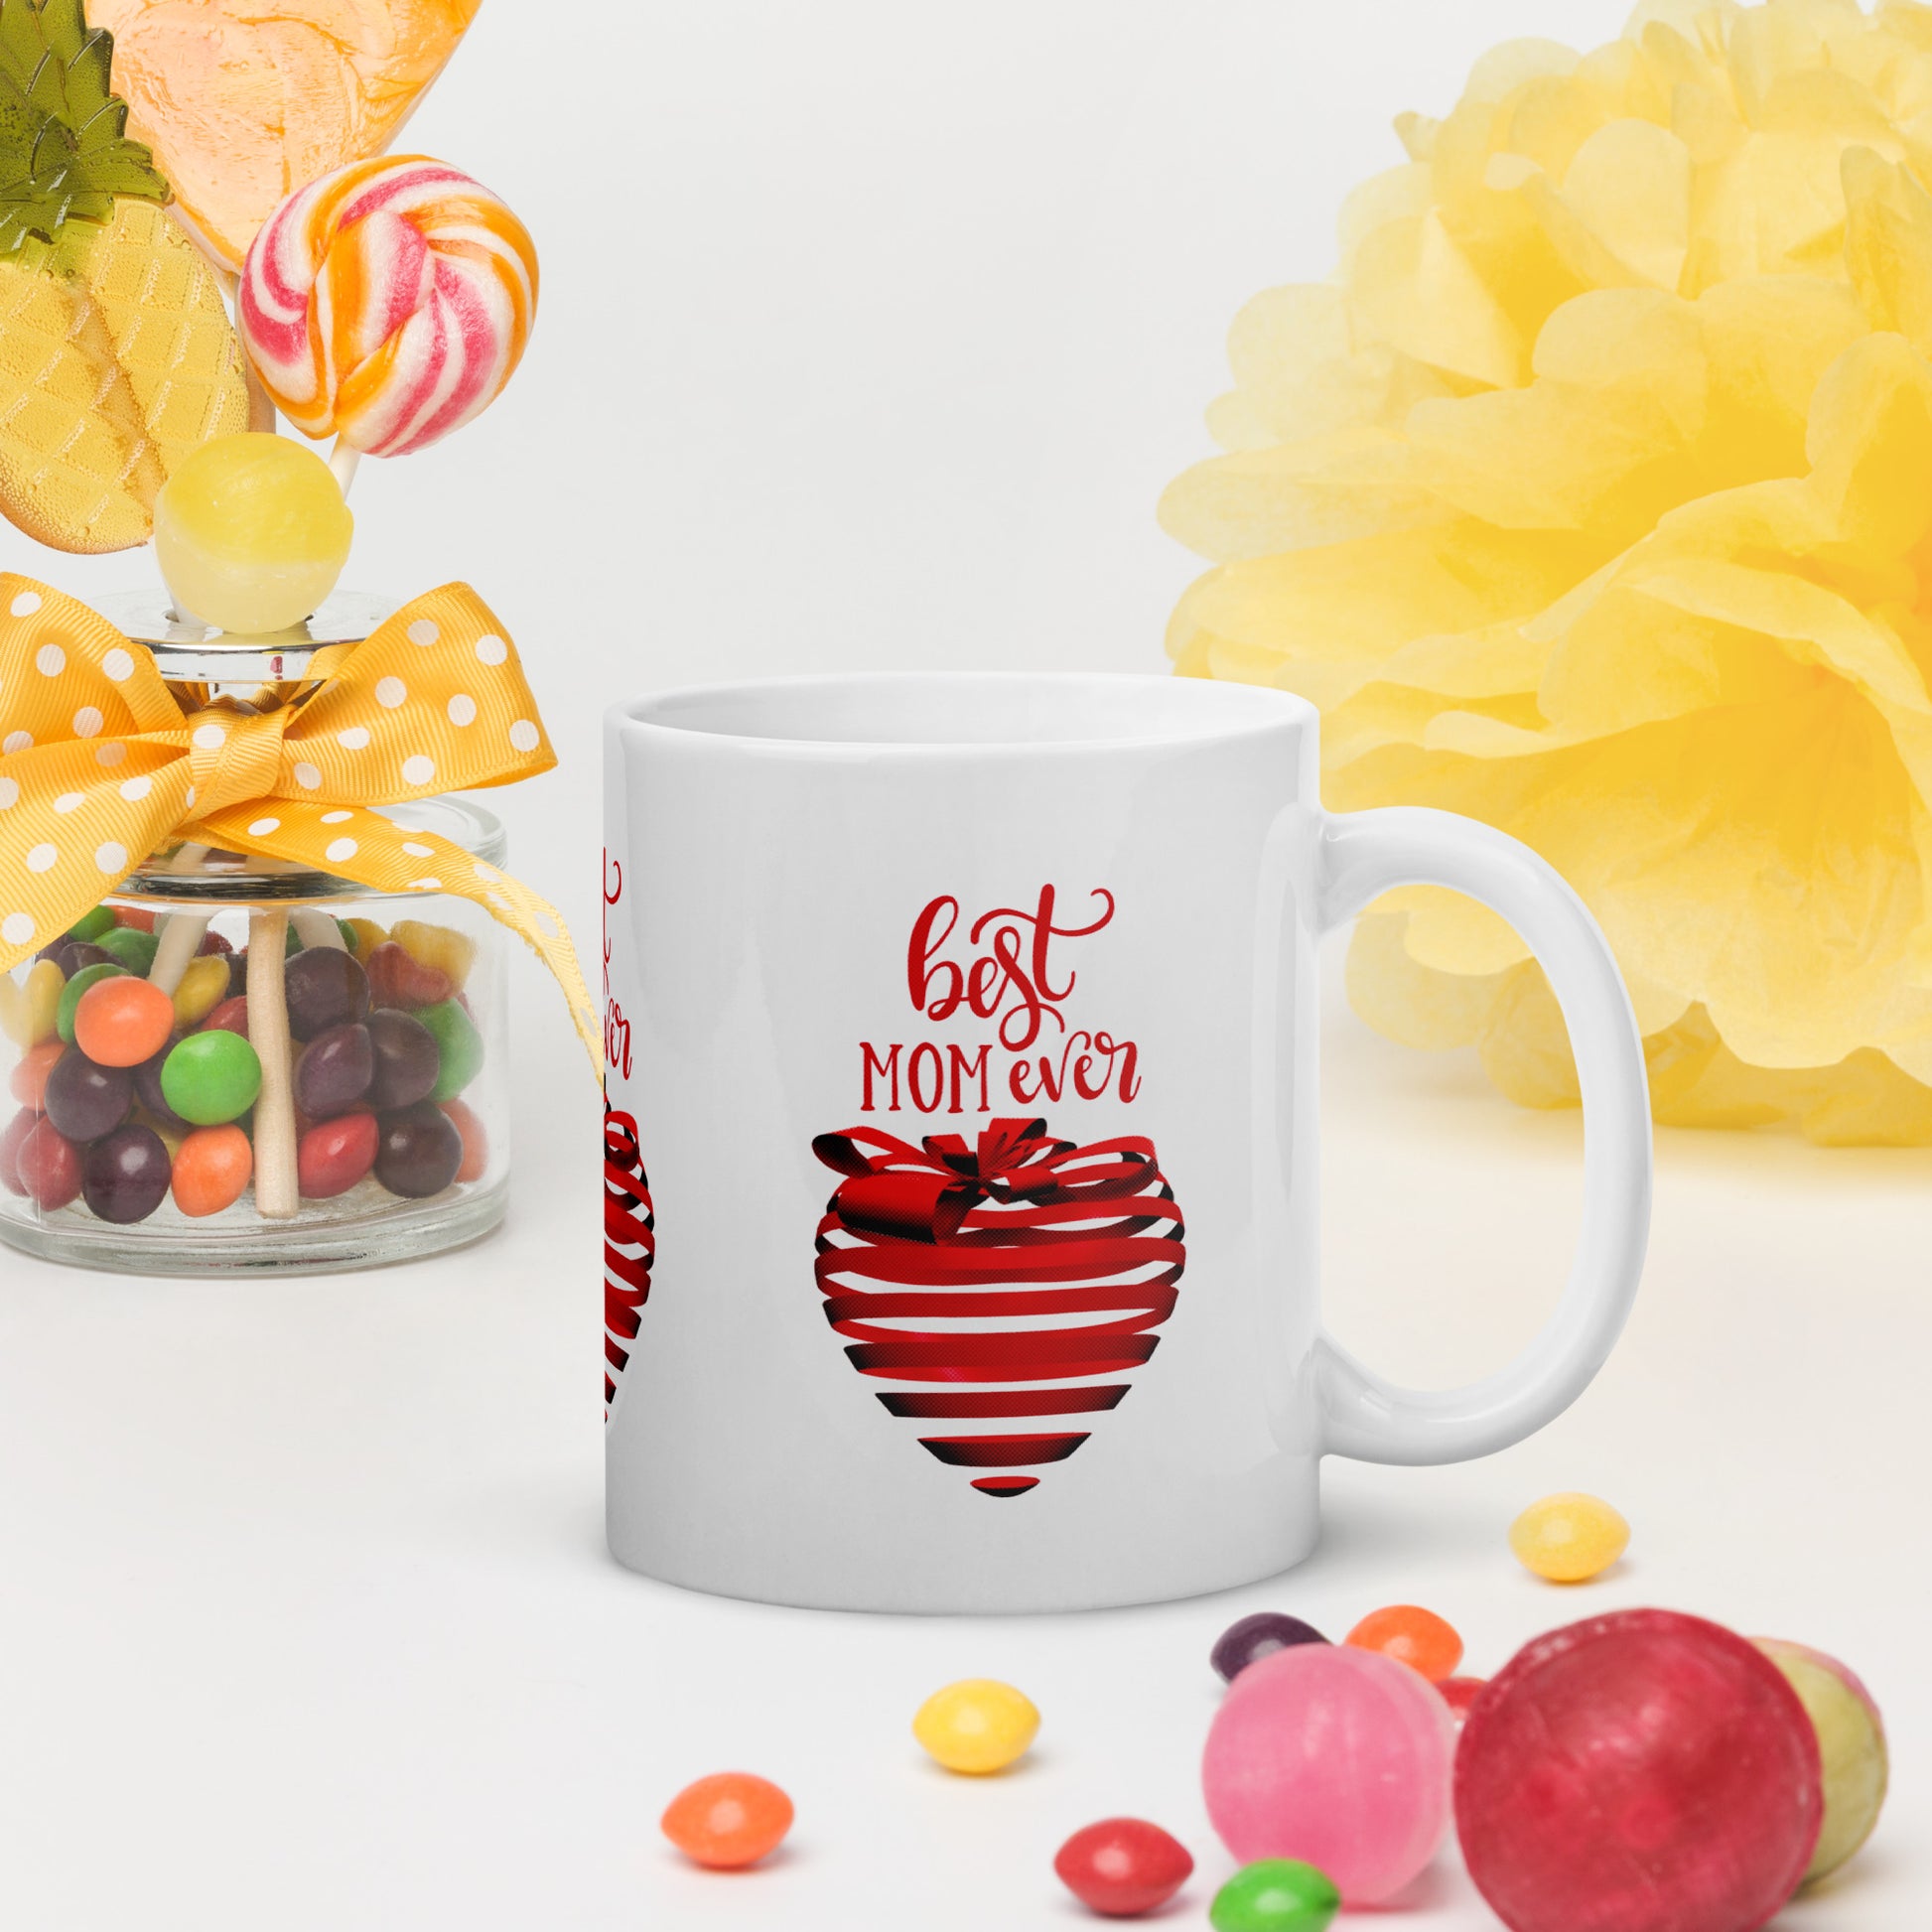 White glossy mug with red text best MOM Ever and red heart